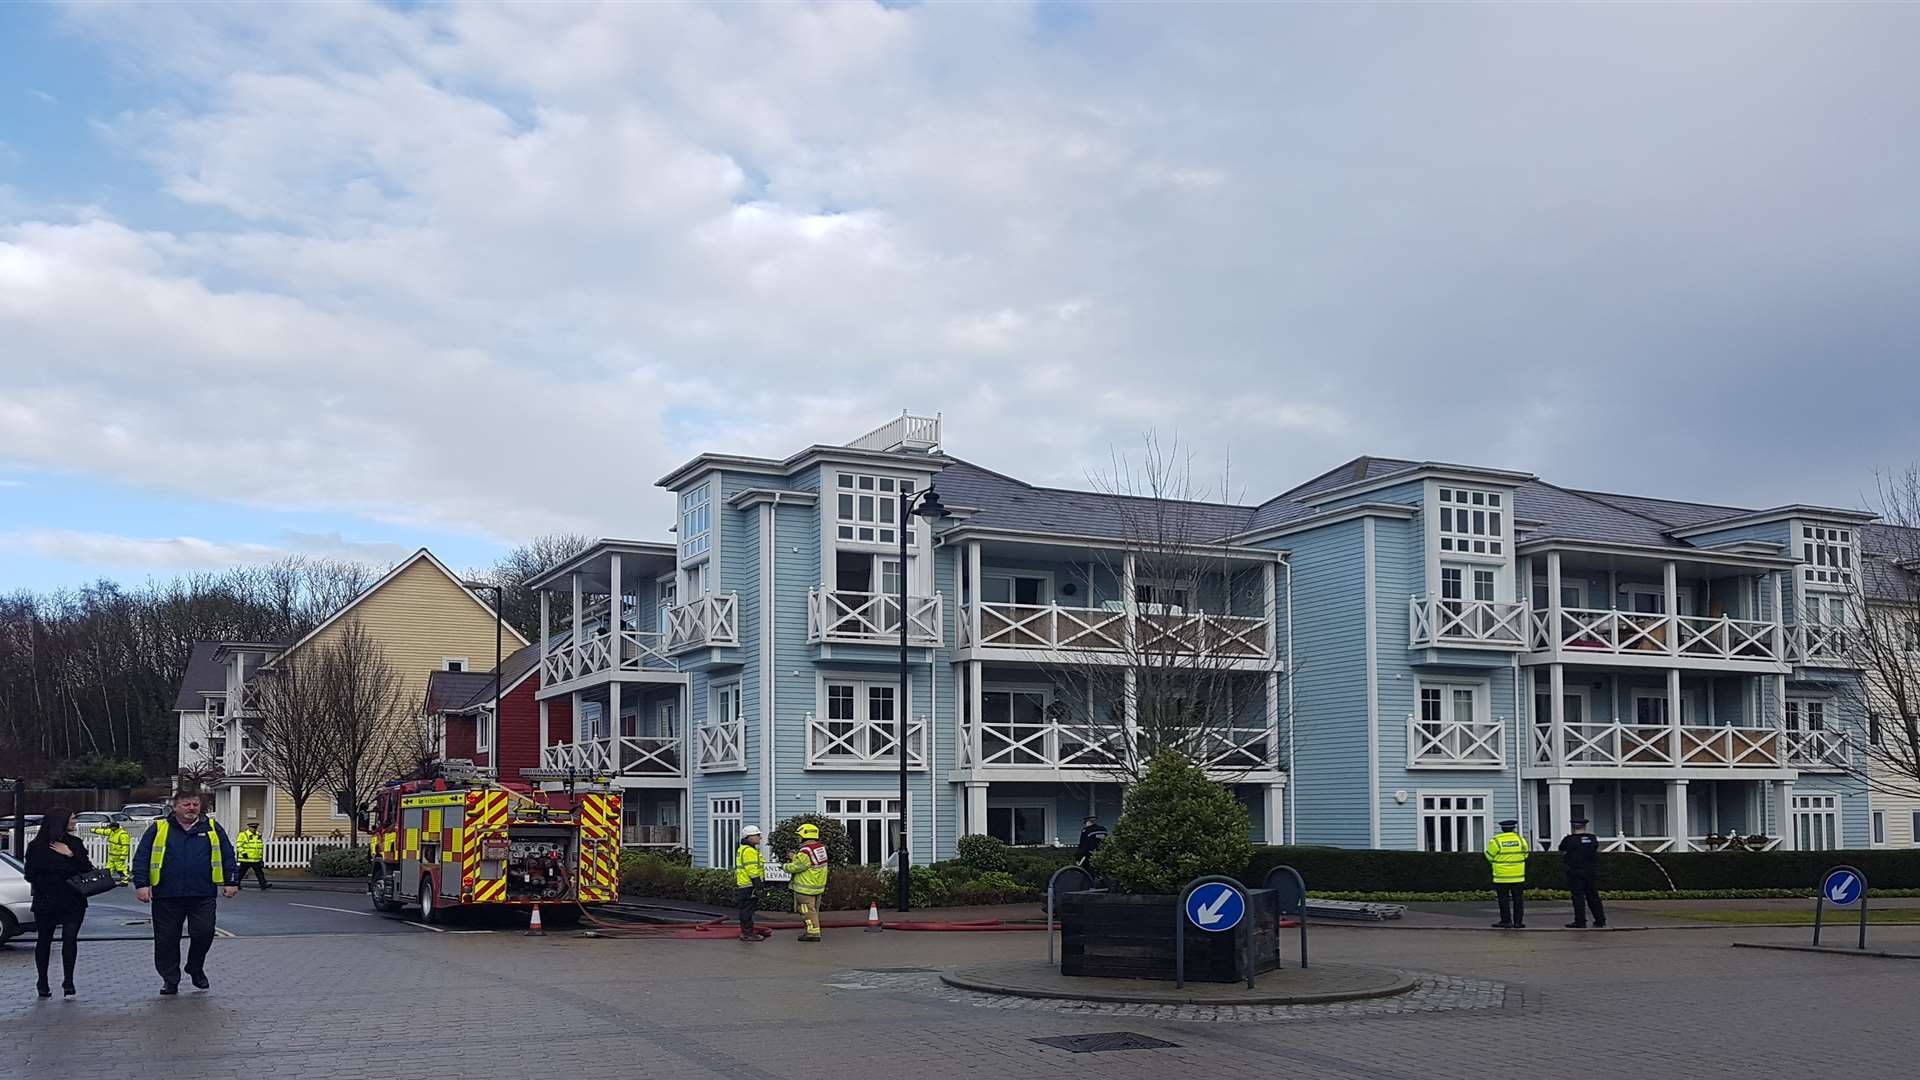 Emergency services were called to the flats